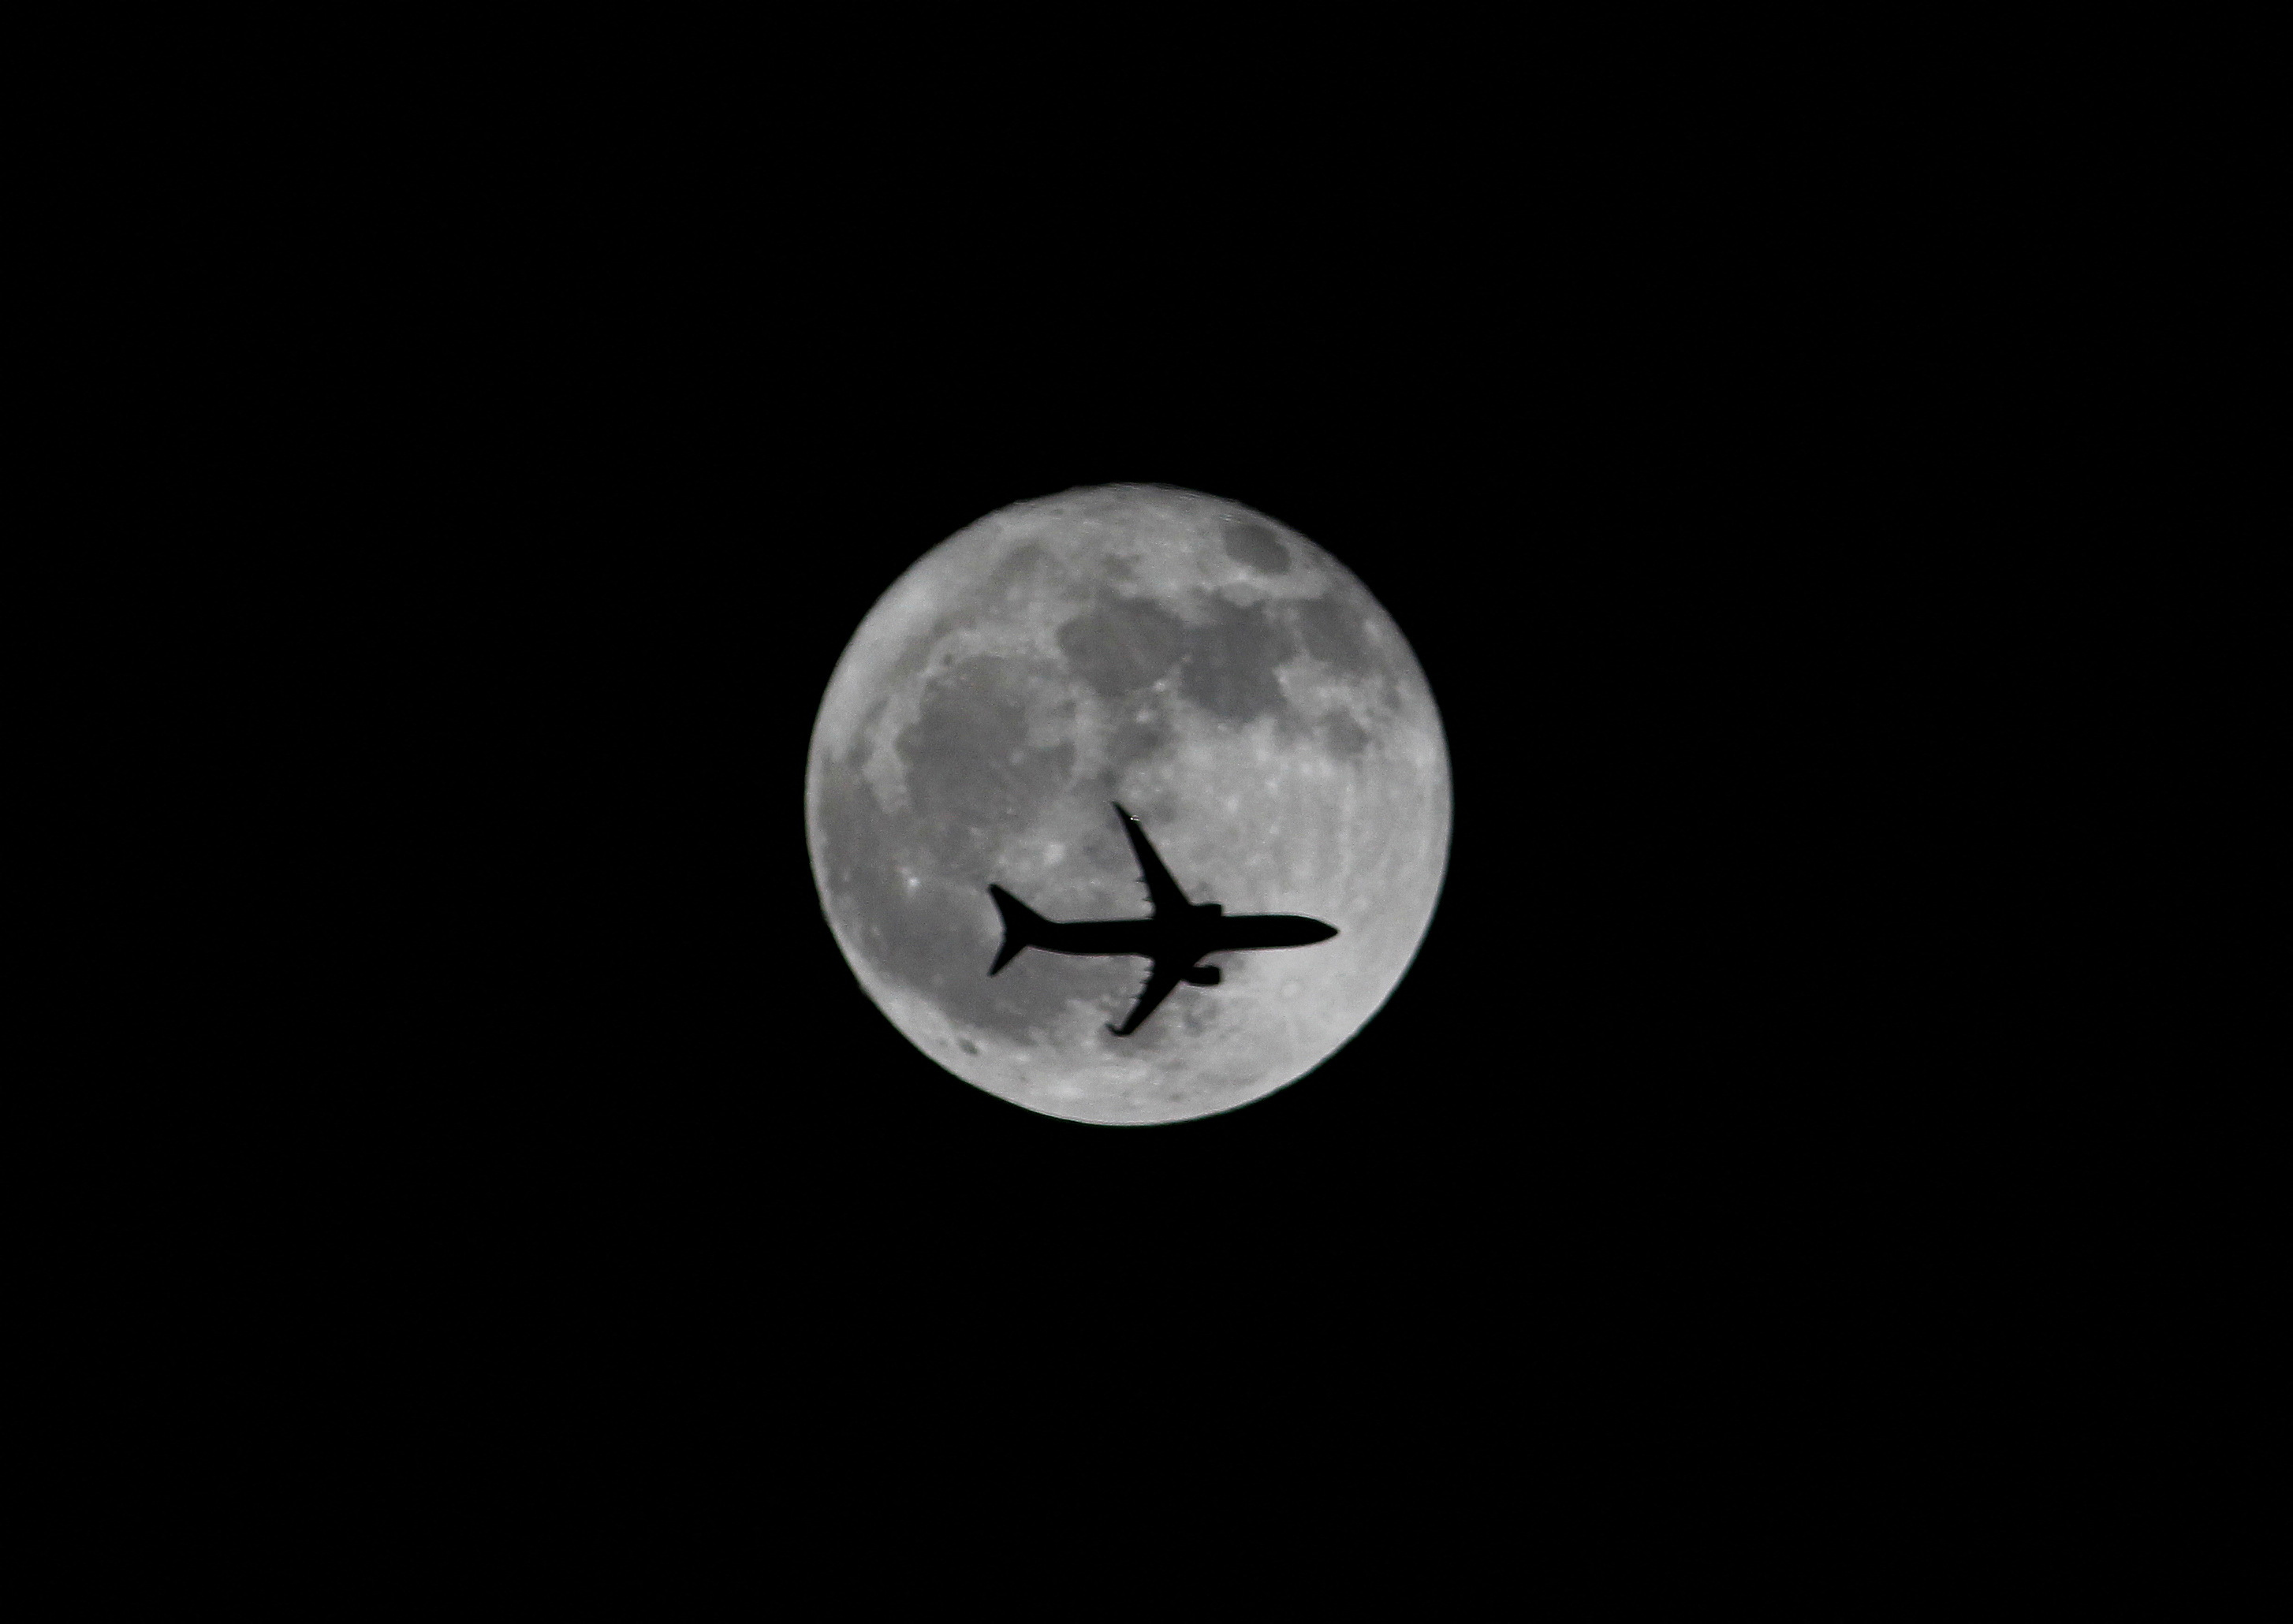 Passenger plane passes the moon as it comes into land at the international airport in Chennai